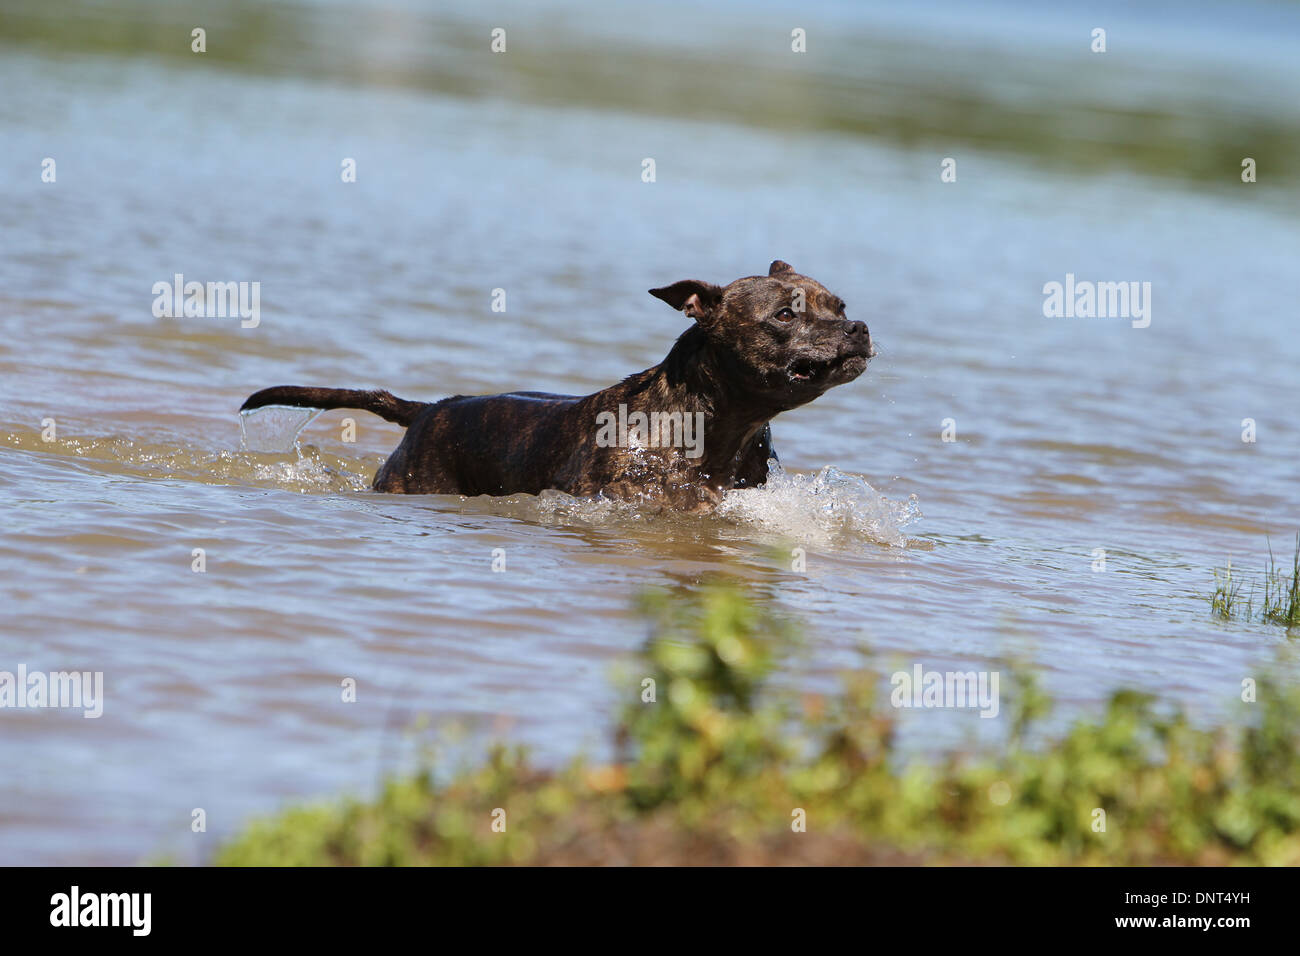 dog Staffordshire Bull Terrier / Staffie   adult swimming in a lake Stock Photo